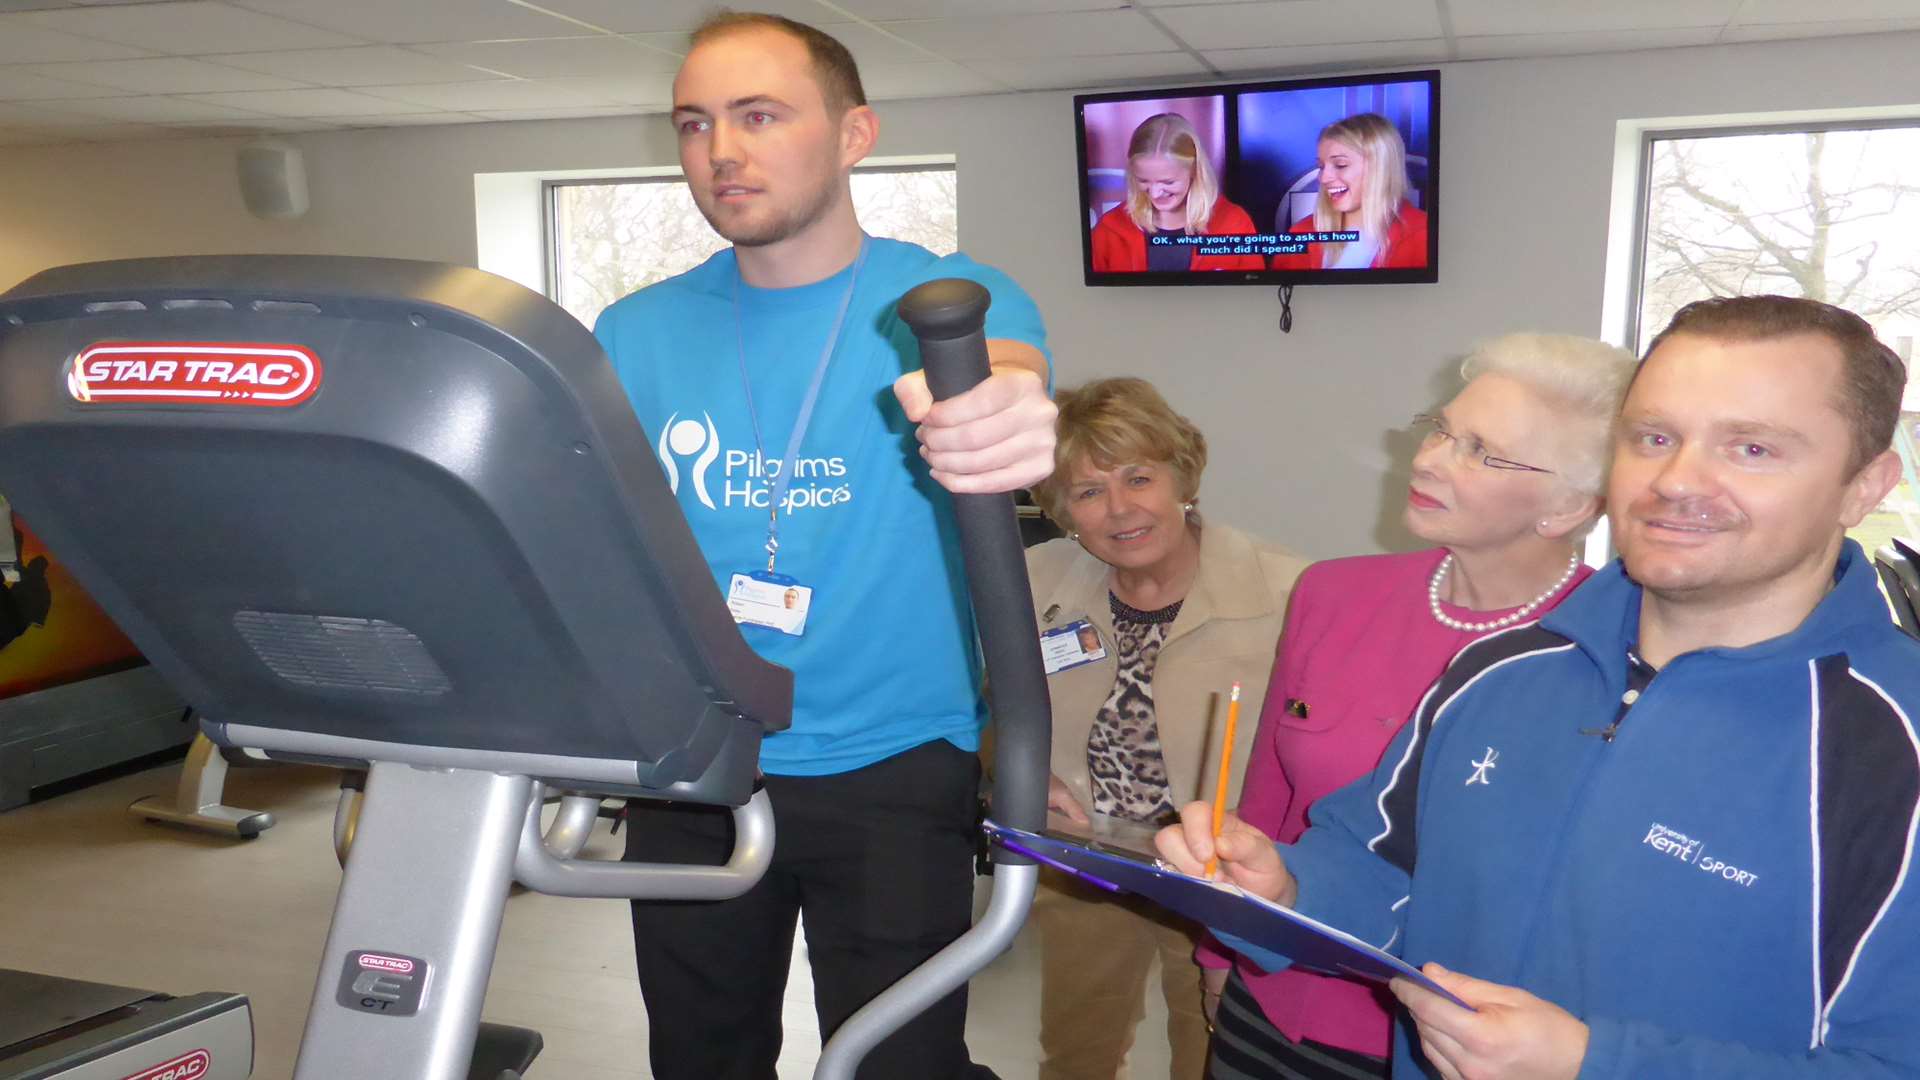 Robert Grew, of Pilgrims Hospice in East Kent, gets a workout from University of Kent Sport staff and League of Friends at Kent and Canterbury Hospital who collectively are supporting the KM Canterbury Big Charity Quiz